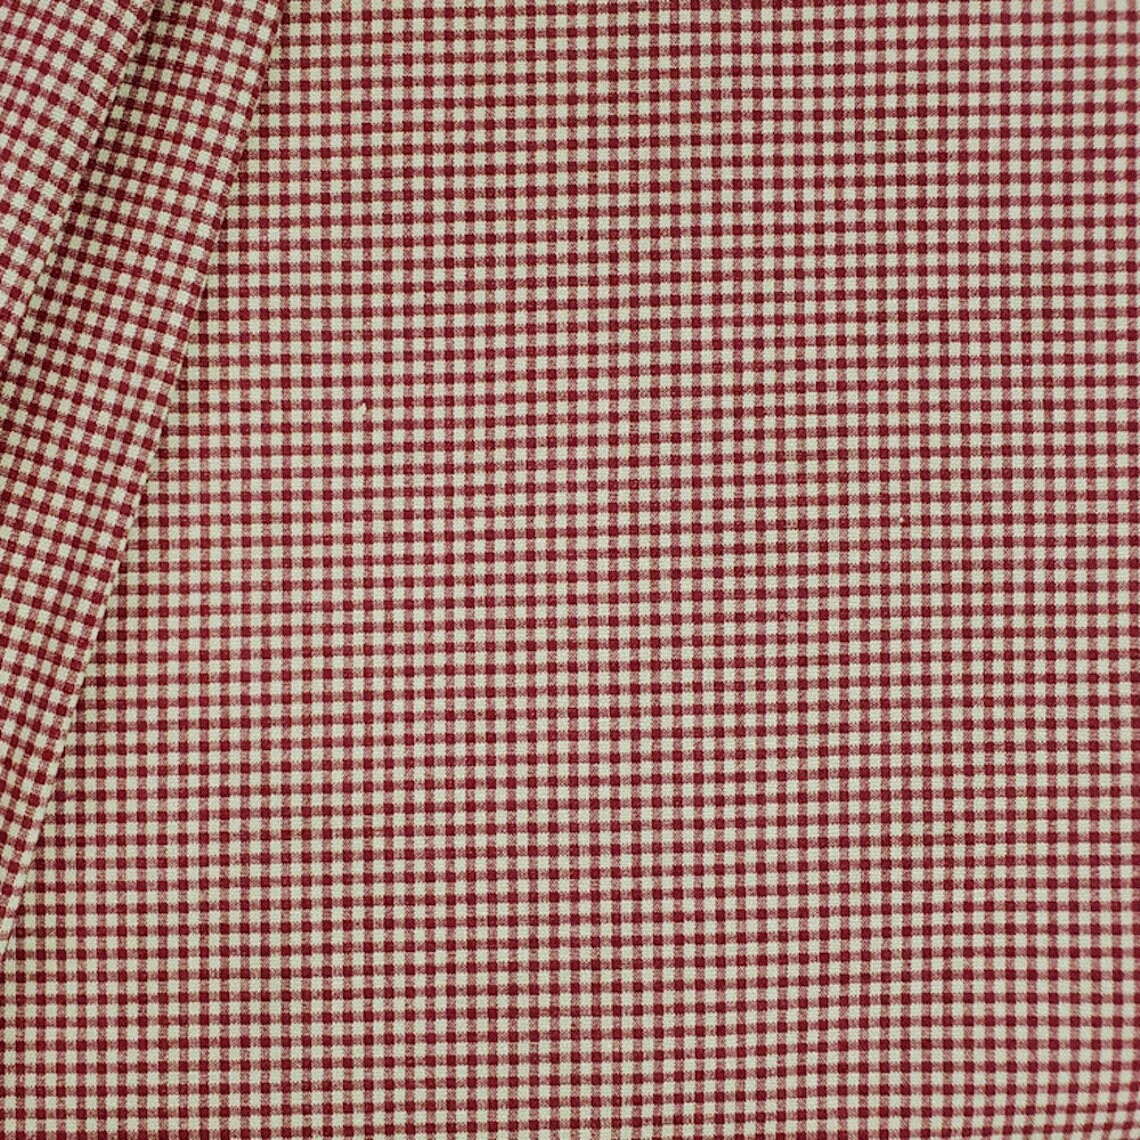 round tablecloth in farmhouse red gingham check on beige